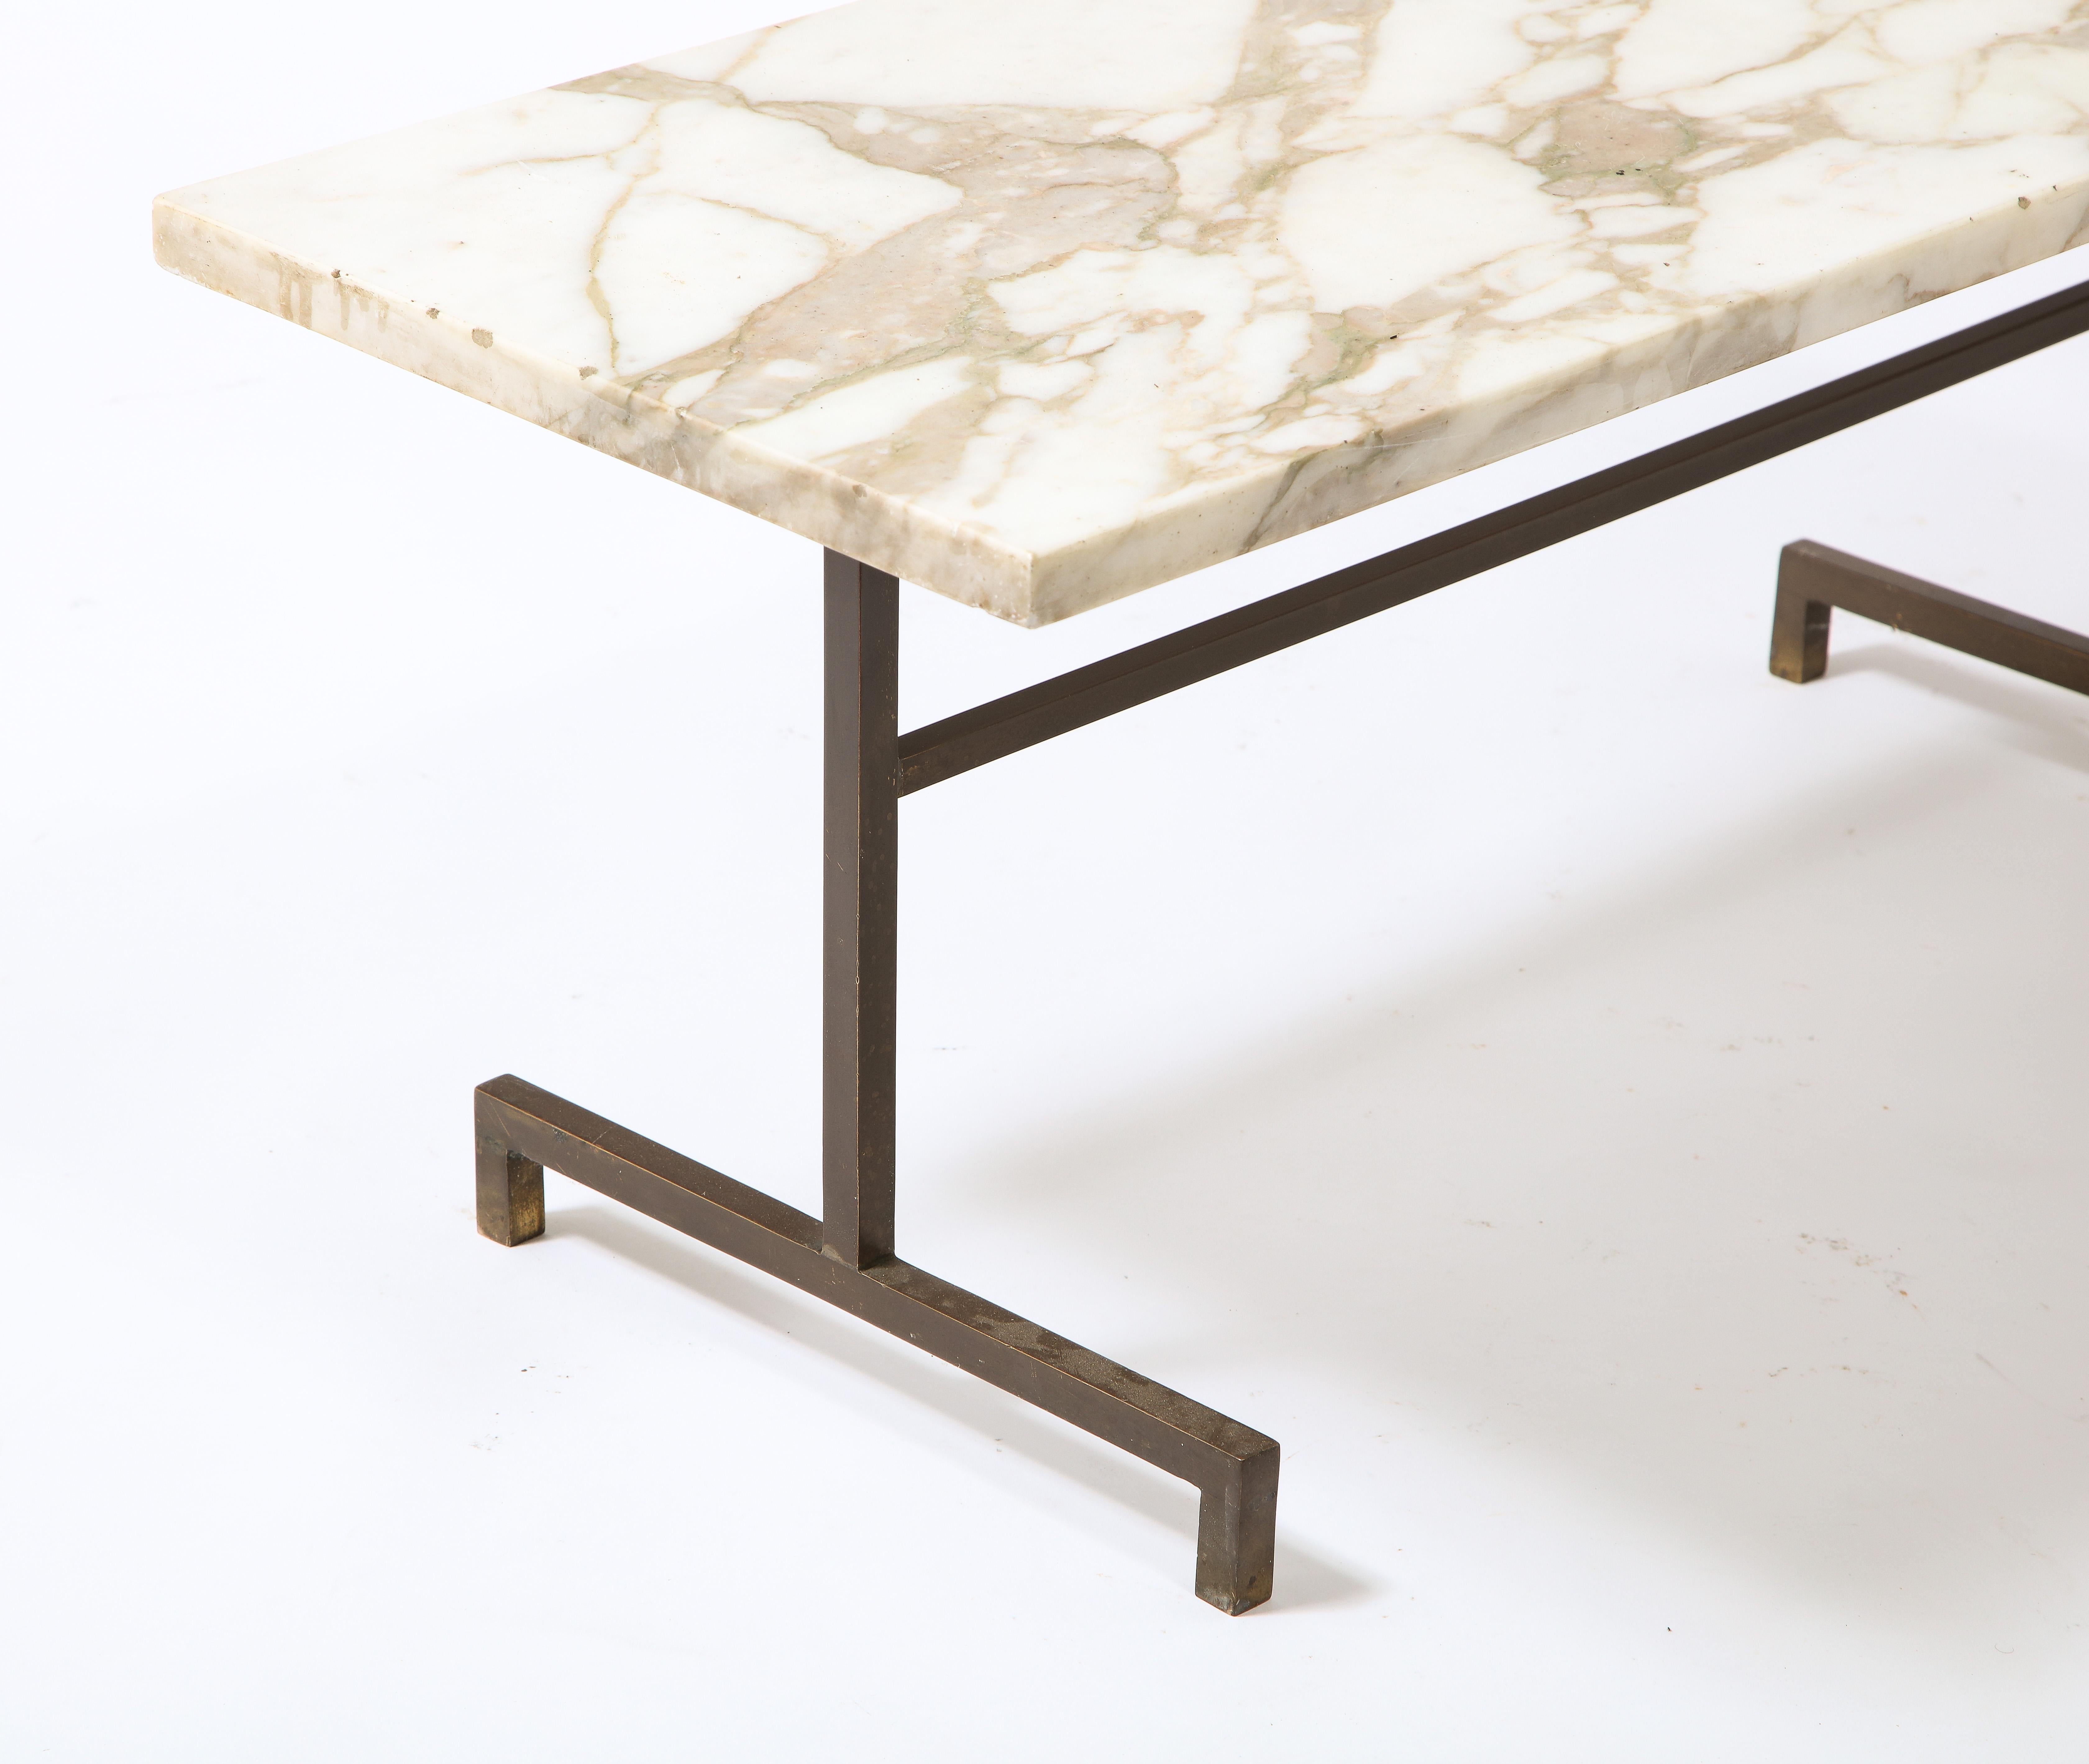 Simple Modernist Duplantier Style Marble & Brass End Table, France 1950's For Sale 2